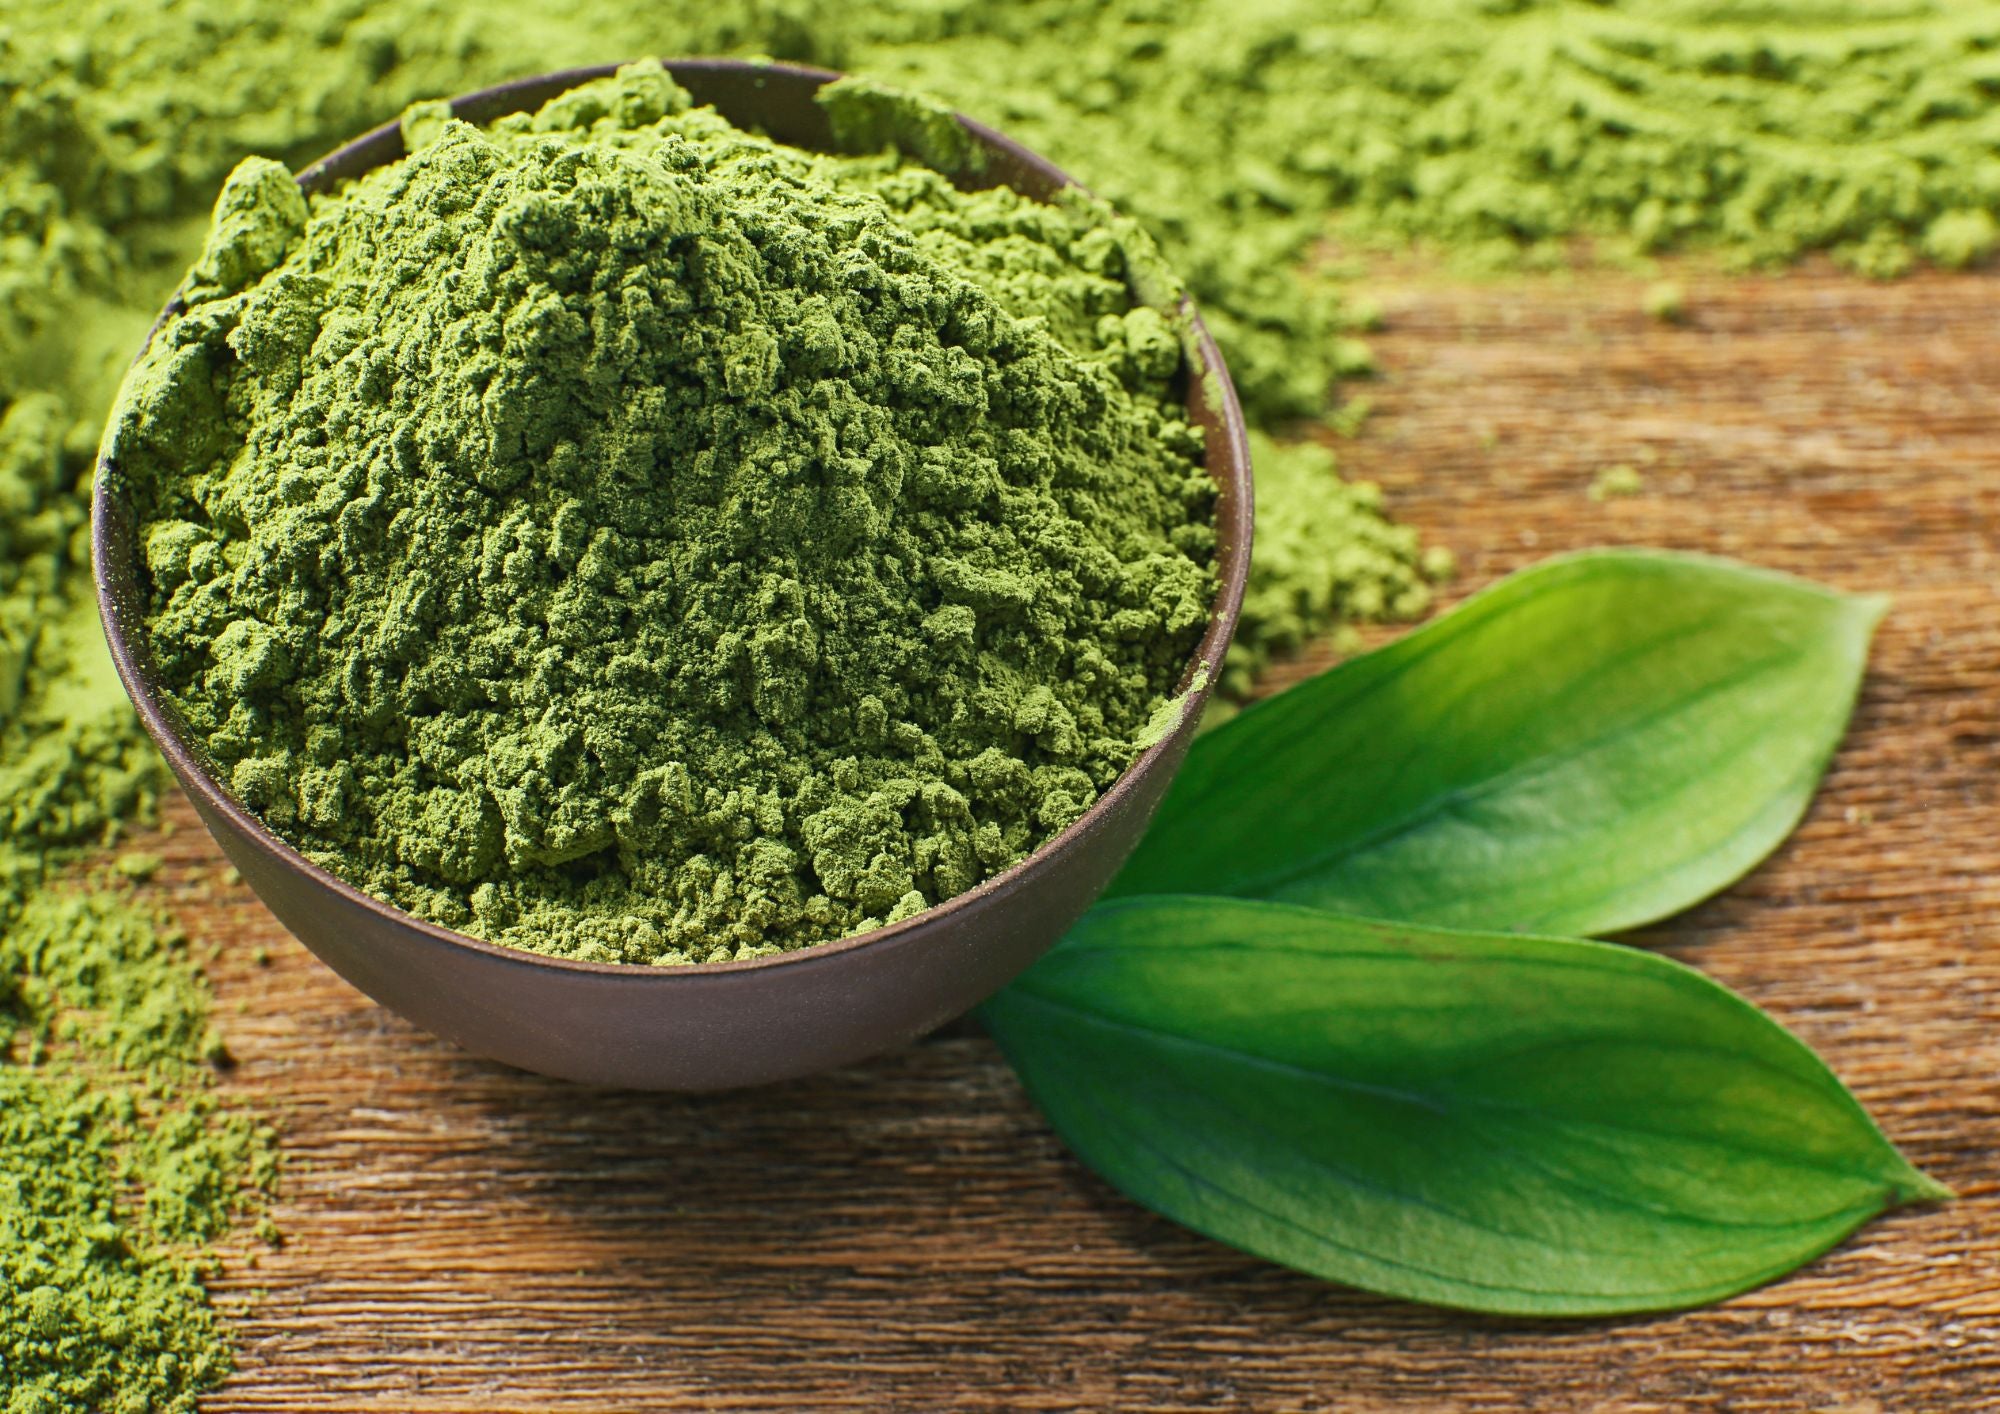 Shop for the Best Matcha Latte Powder Online in the United States